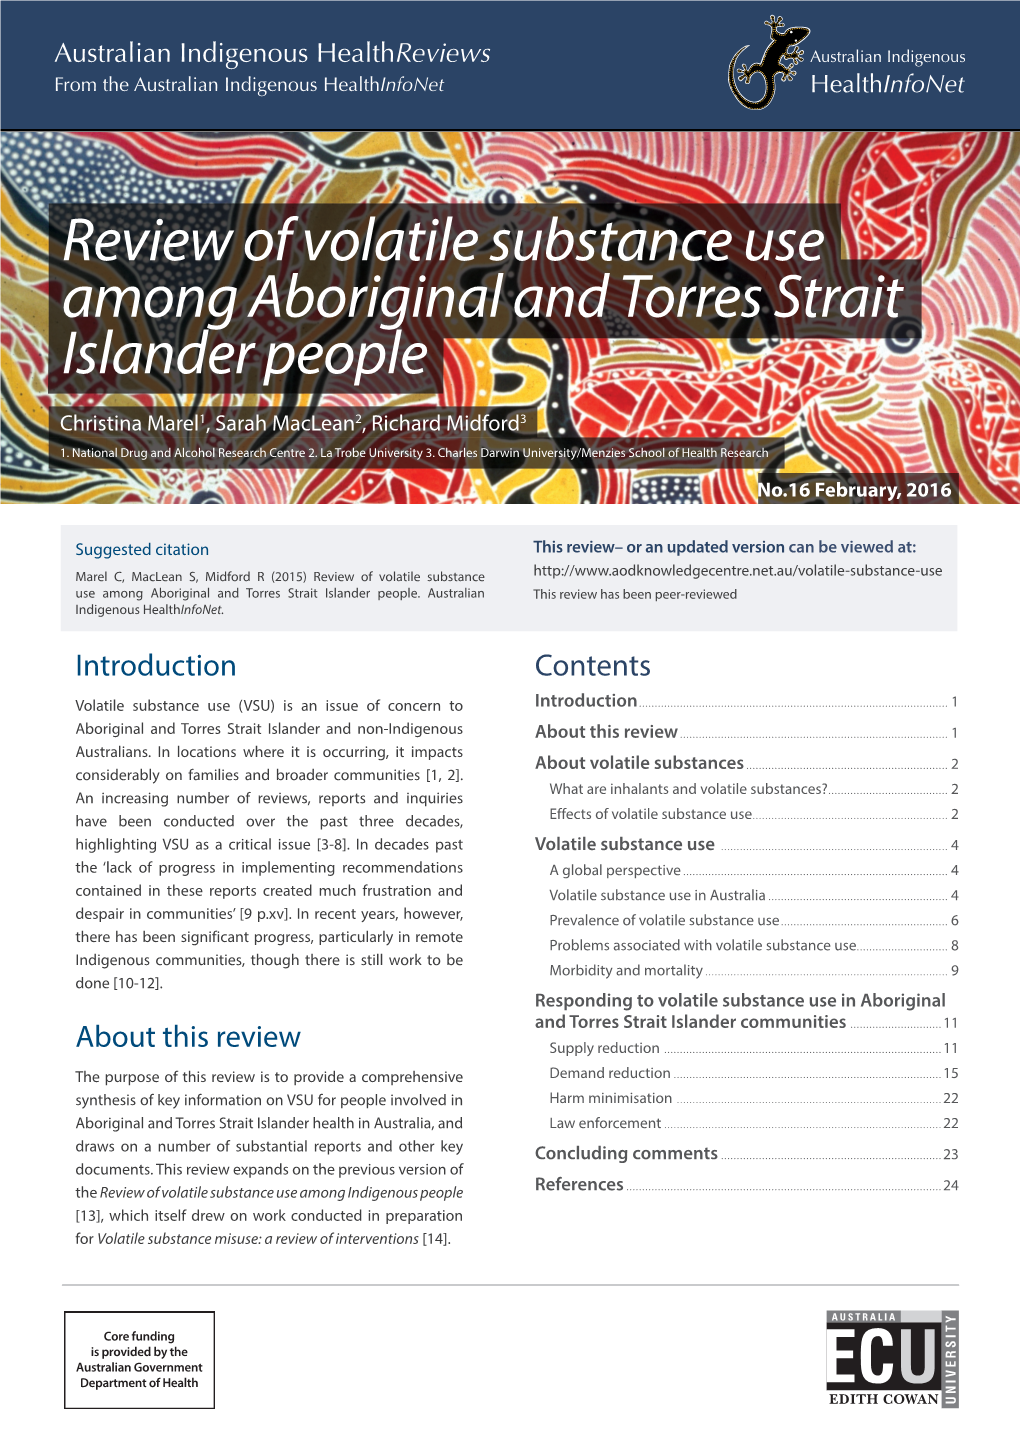 Review of Volatile Substance Use Among Aboriginal and Torres Strait Islander People